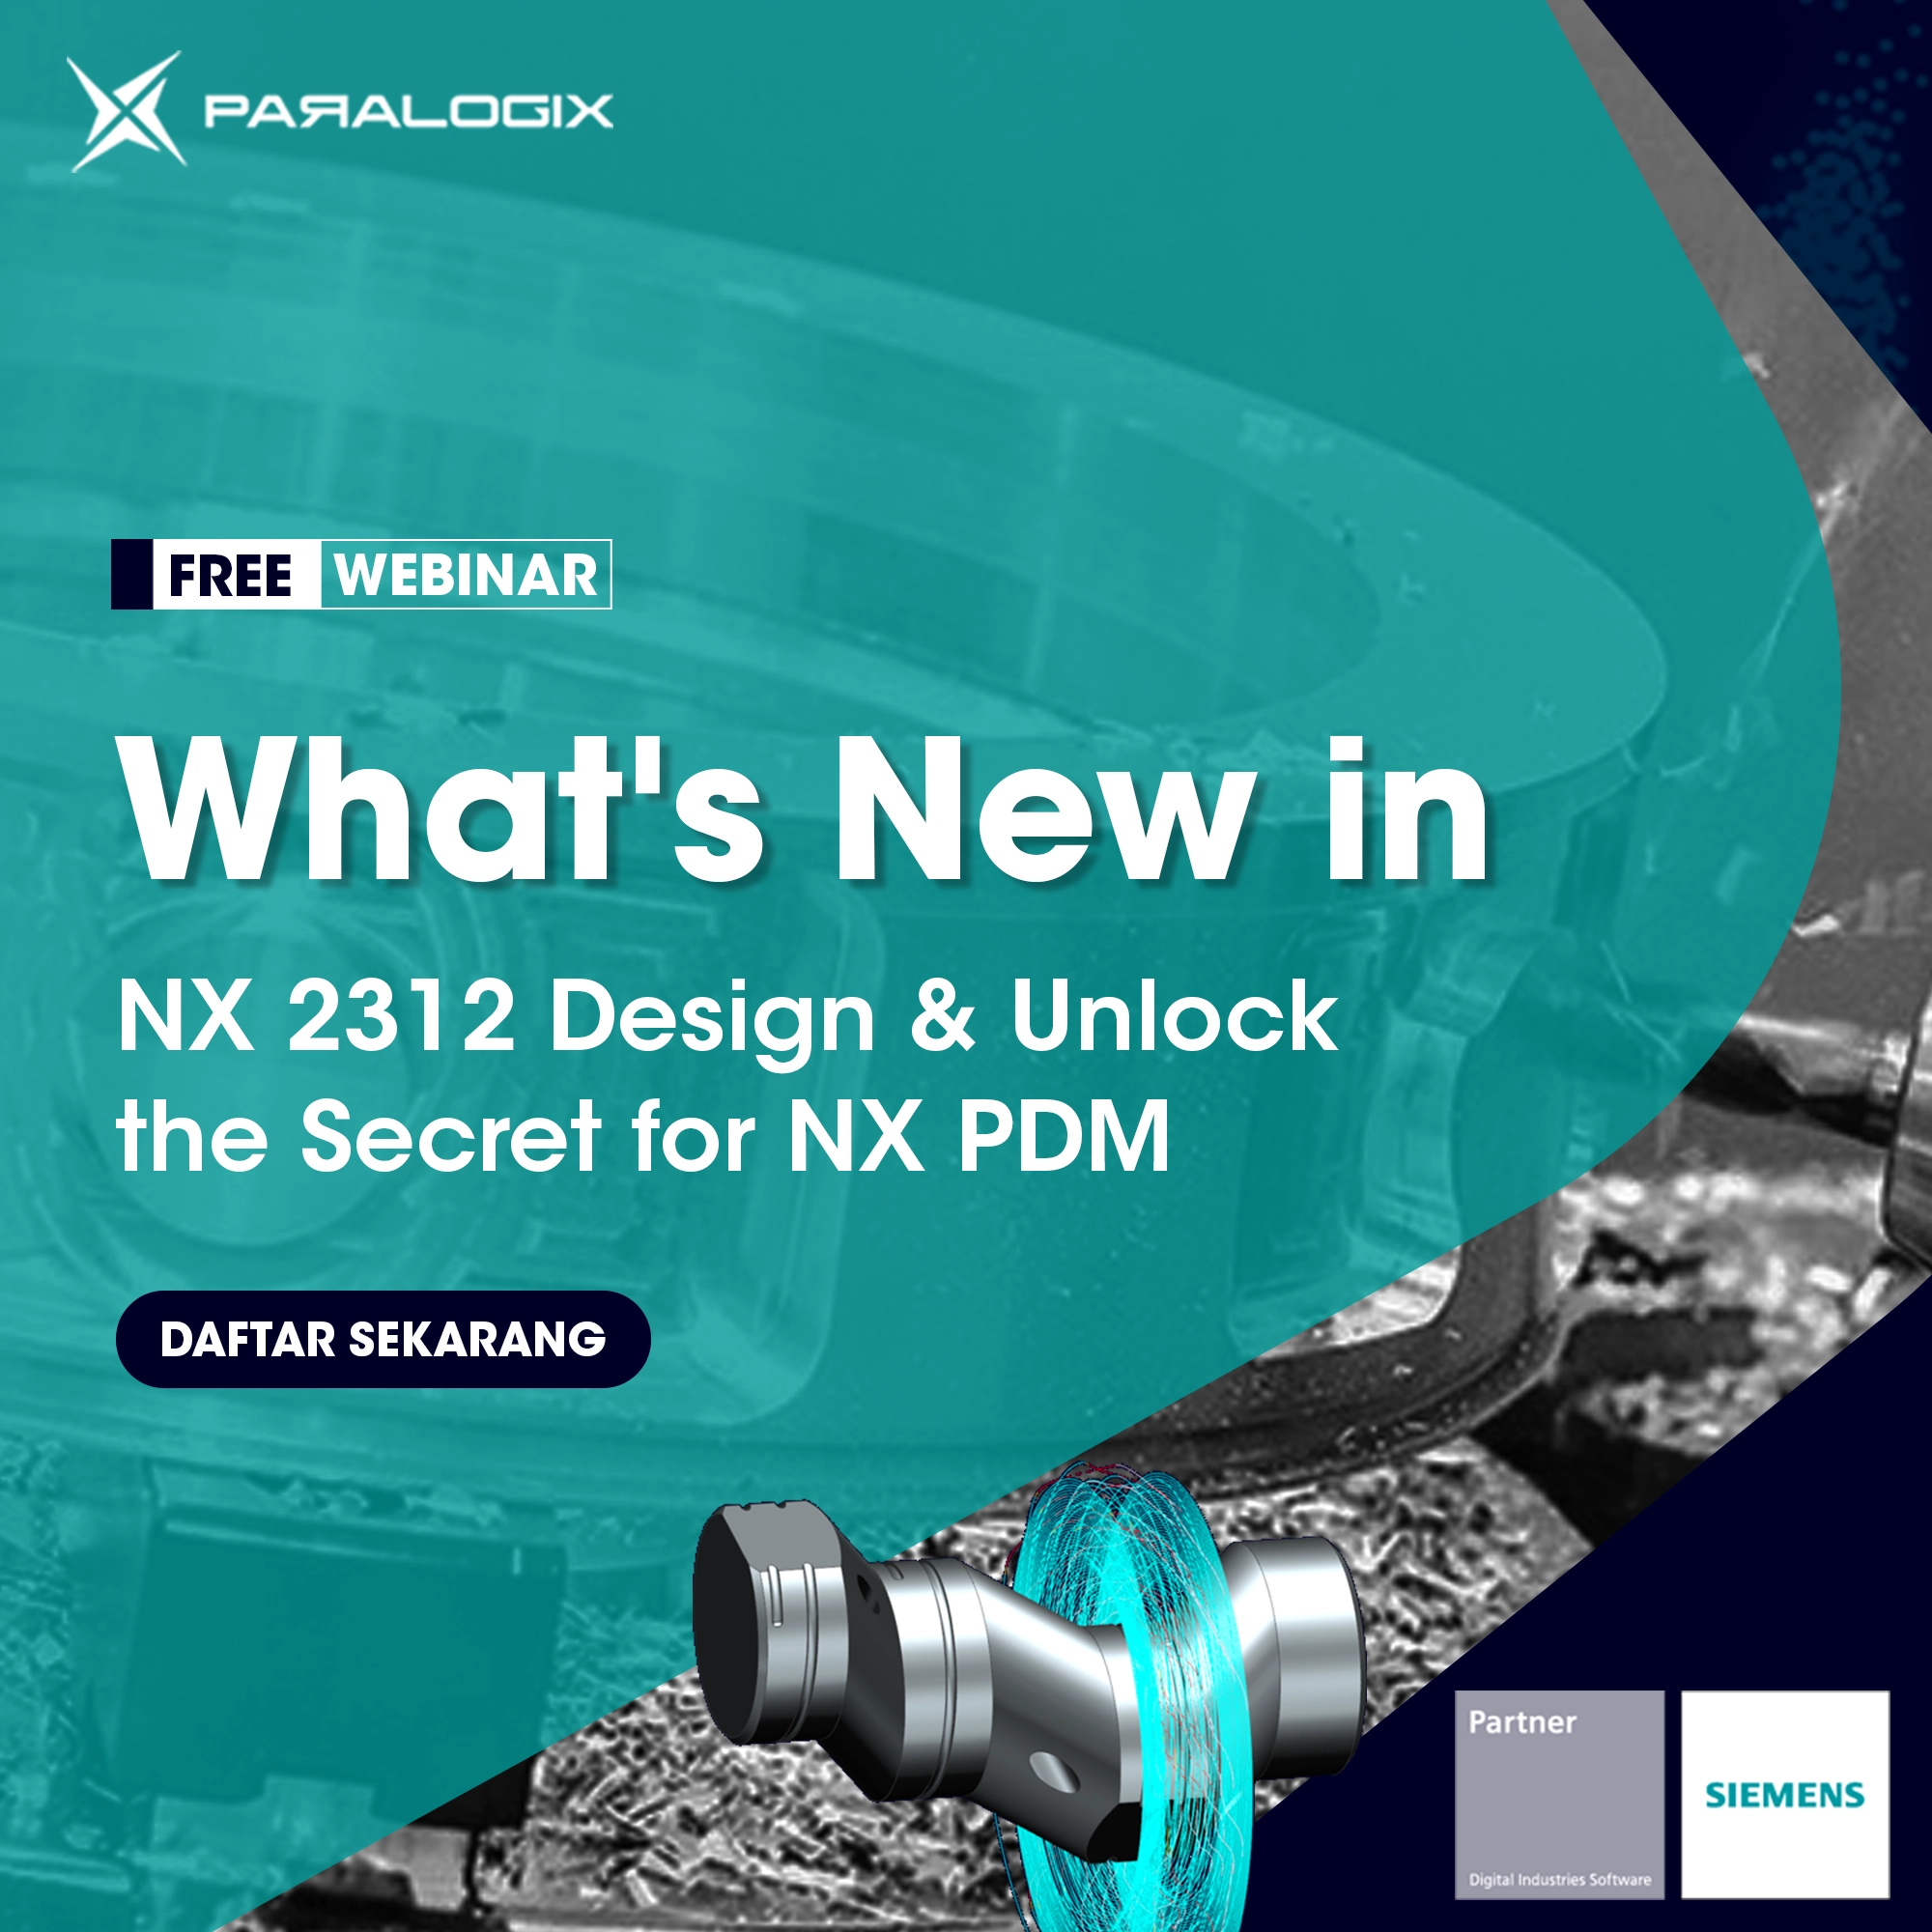 What's New in NX 2312 Design & Unlock the Secret for NX PDM